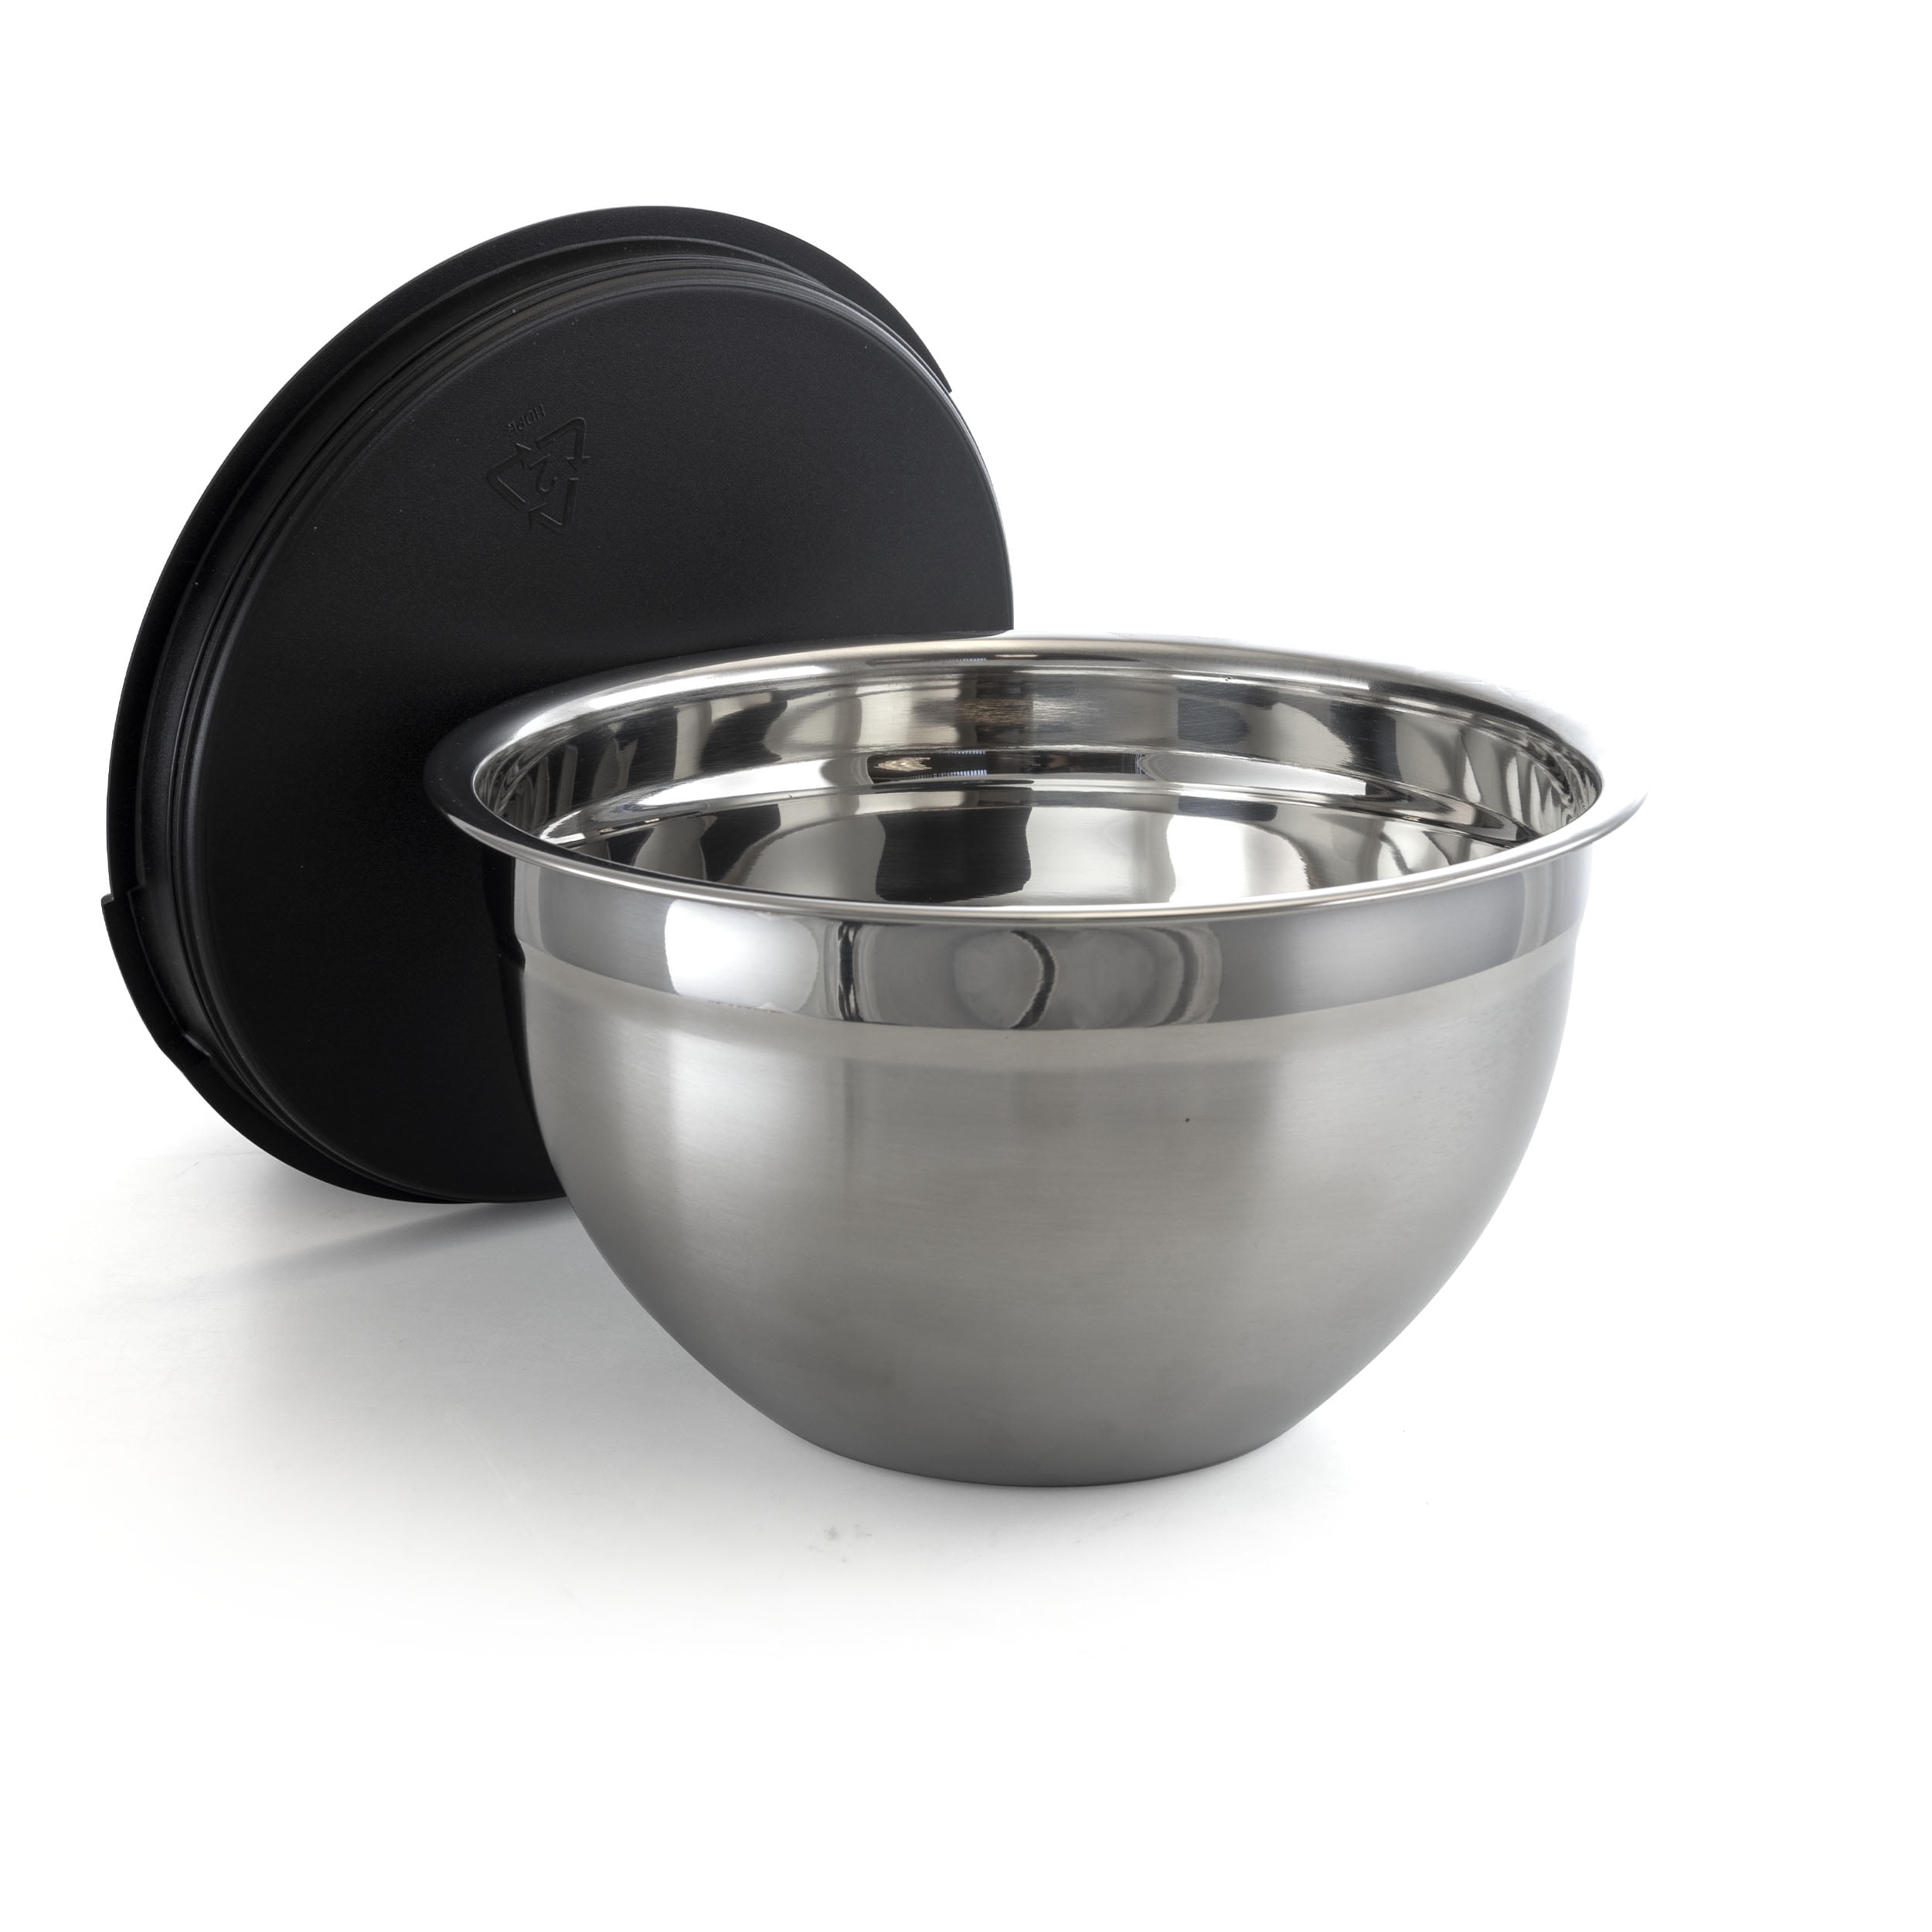 MegaChef Multipurpose Stackable Mixing Bowl and Measuring Cup Set